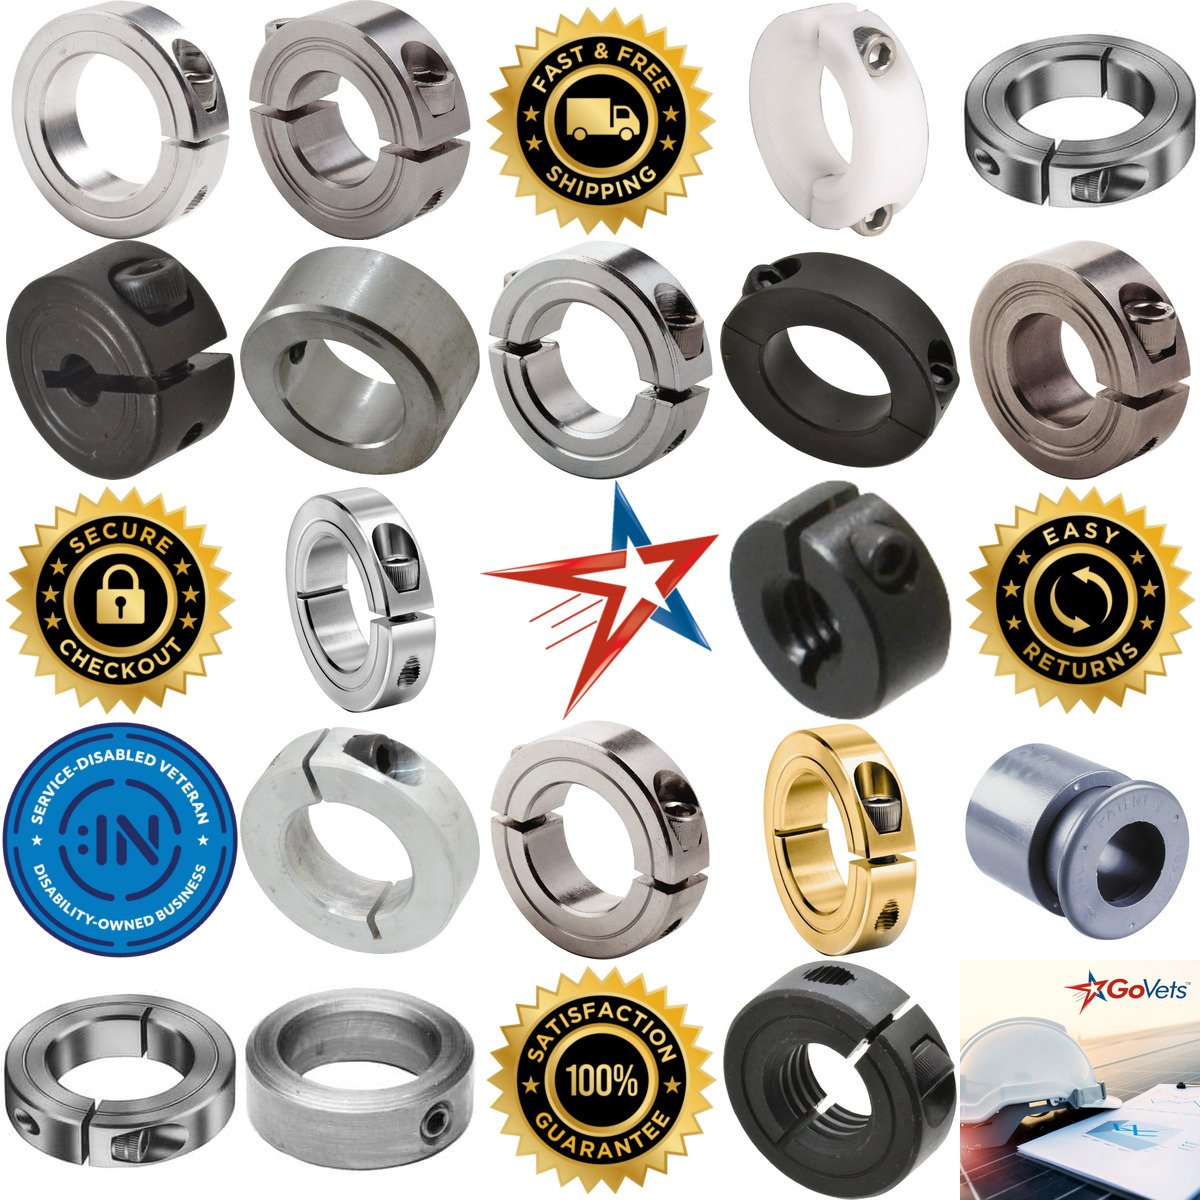 A selection of Shaft and Clamp Collars products on GoVets